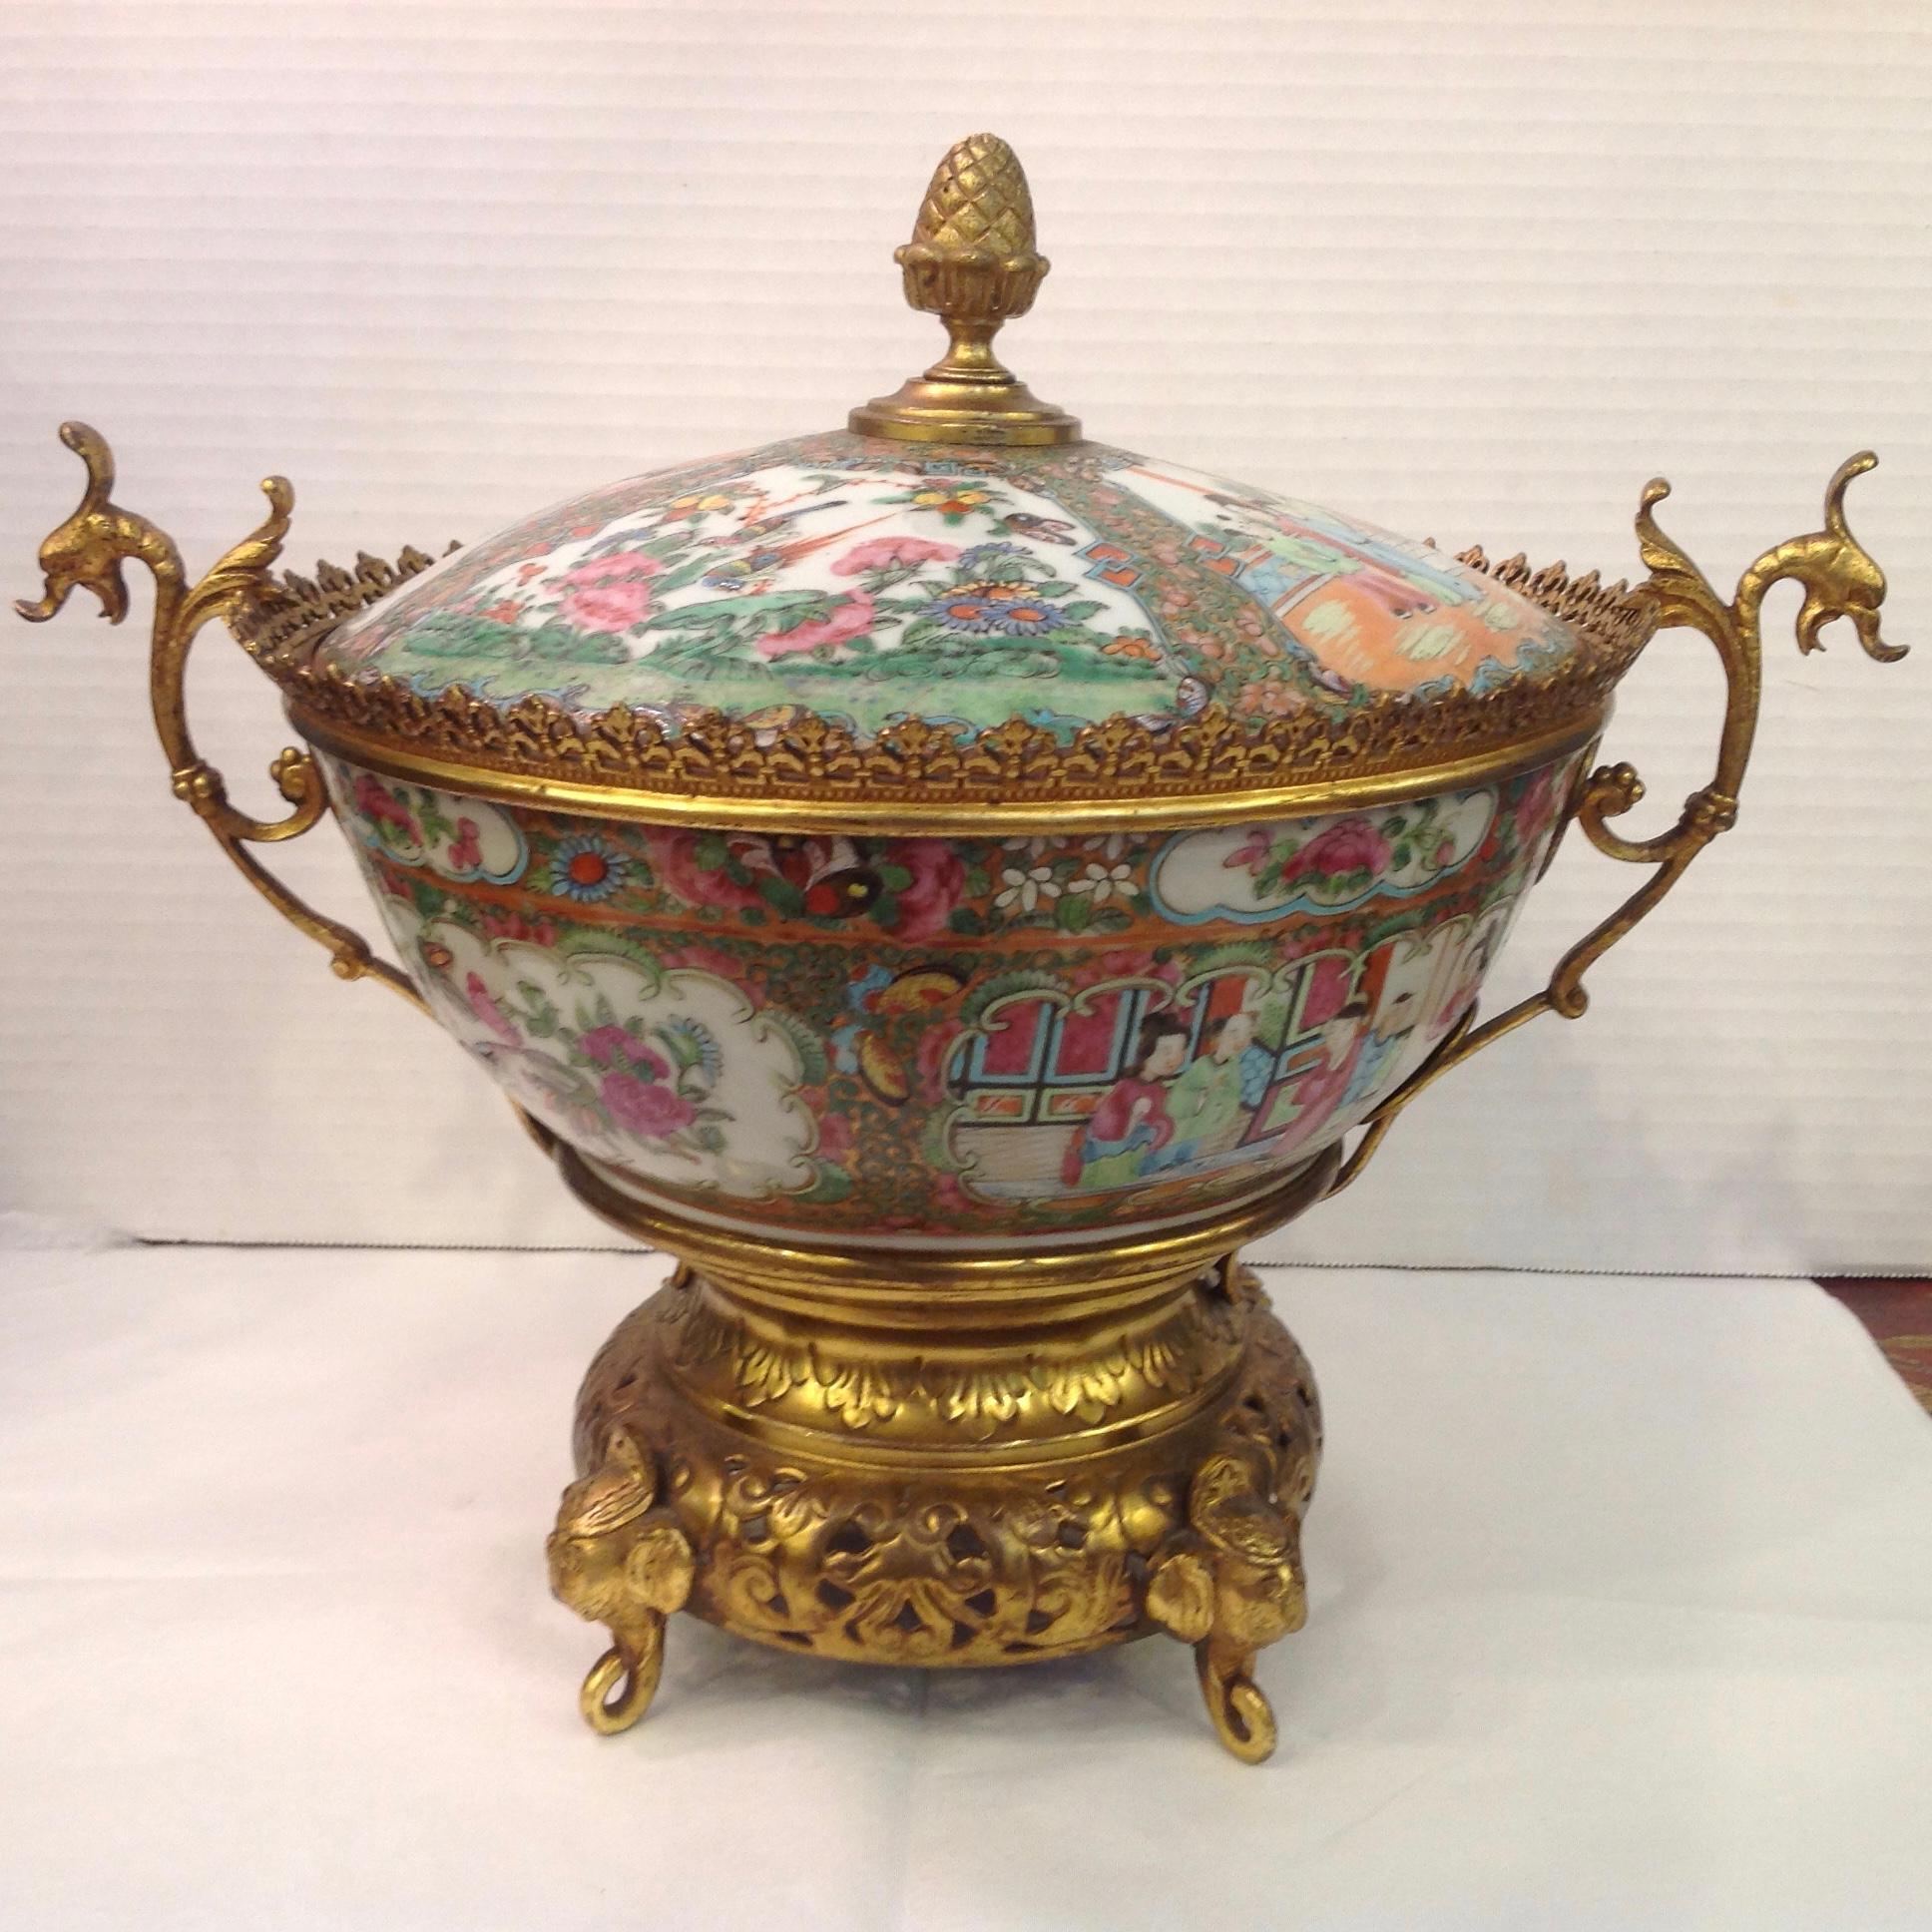 A superior bronze / brass-mounted covered bowl appointed with handles 
and an elaborate base terminating with elephant head supports 
[diameter with handles is 15